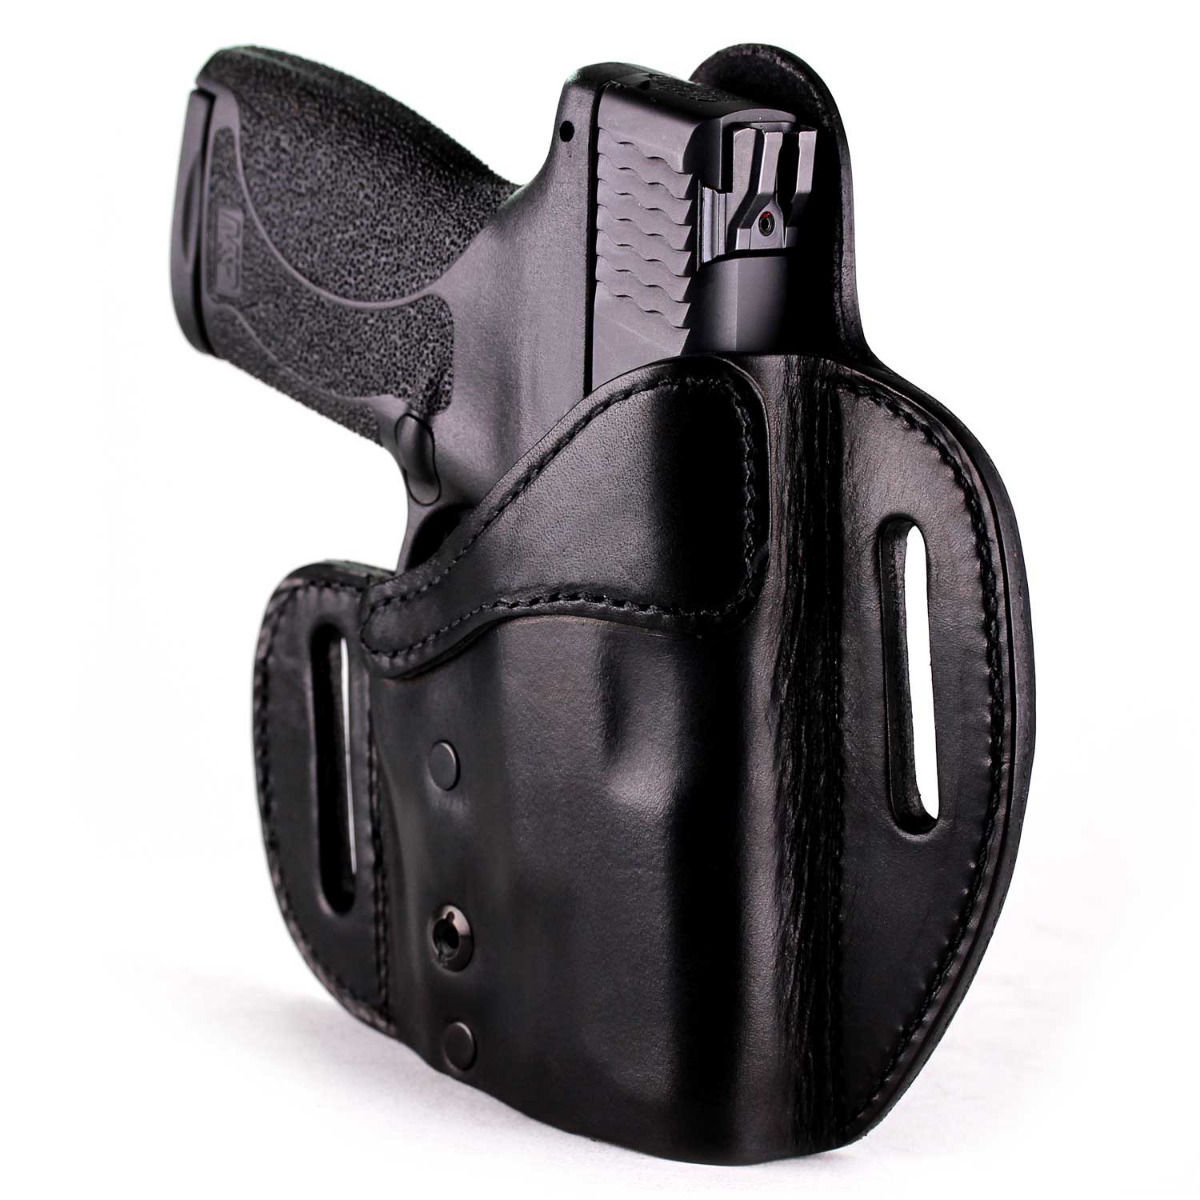 Details about   HD Concealed RH LH OWB IWB Leather Gun Holster For Ruger LCR w/ CT Laserguard 